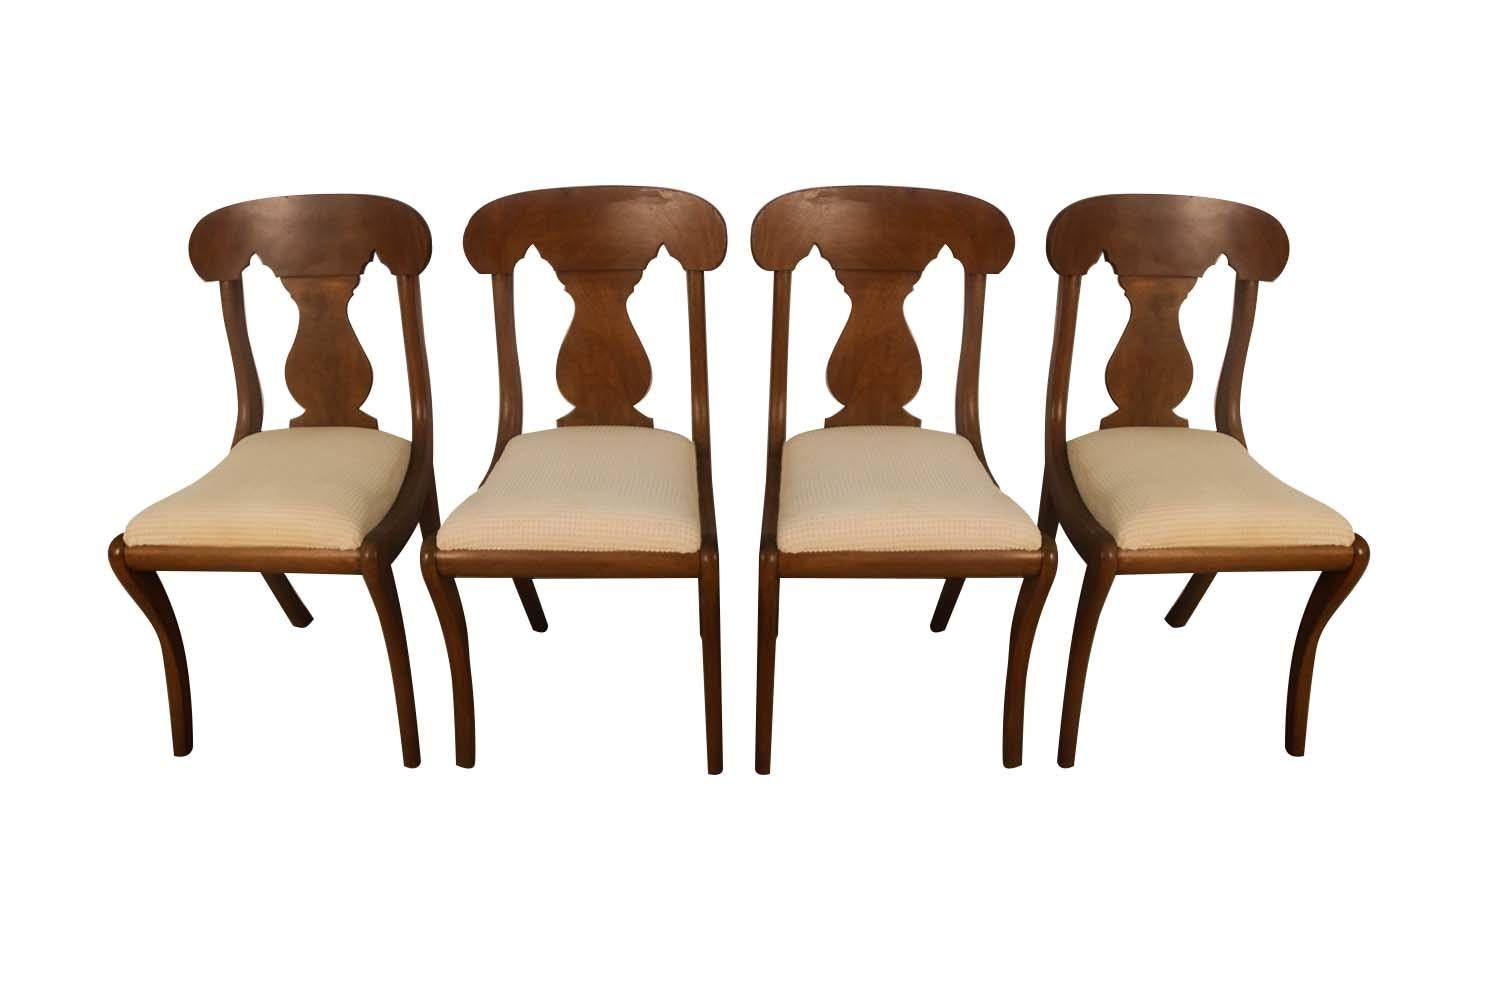 A set of four beautifully crafted Biggs Furniture mahogany Empire style dining chairs, circa first half of the 20th century. These sophisticated dining chairs are fashioned in the empire style and feature a hand crafted Honduran mahogany frame with